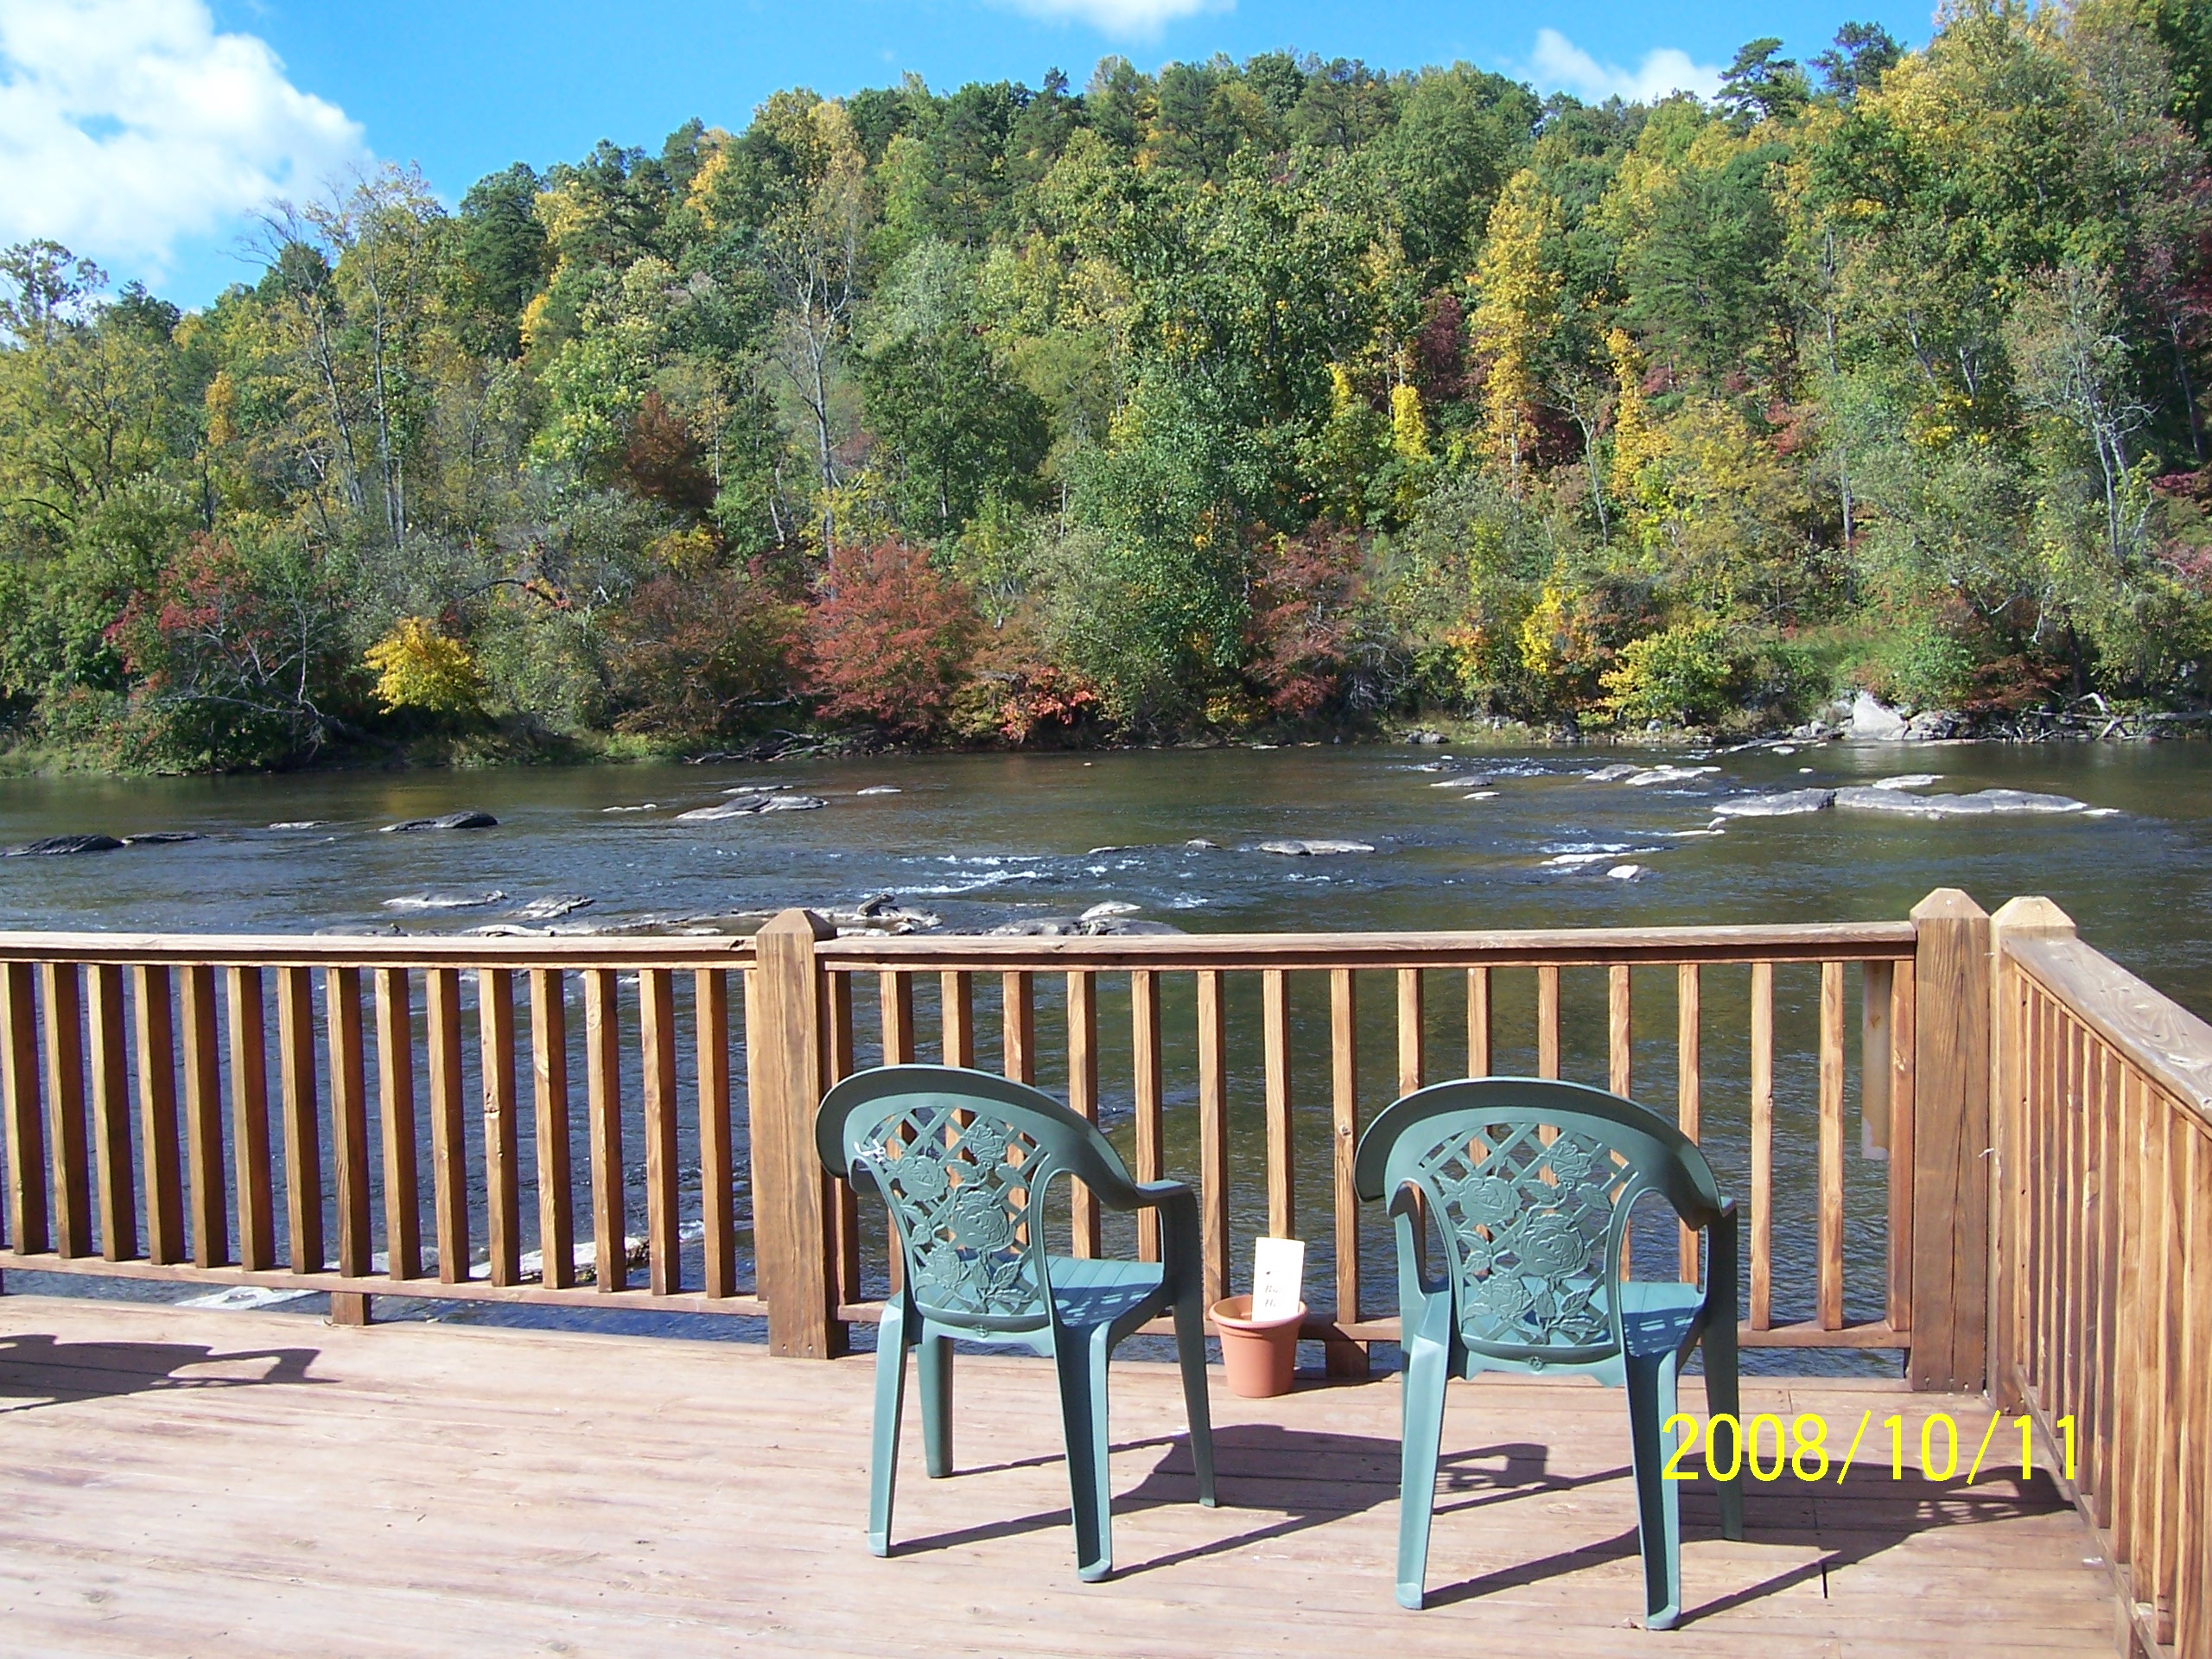 Deck at the picnic overlooking the river